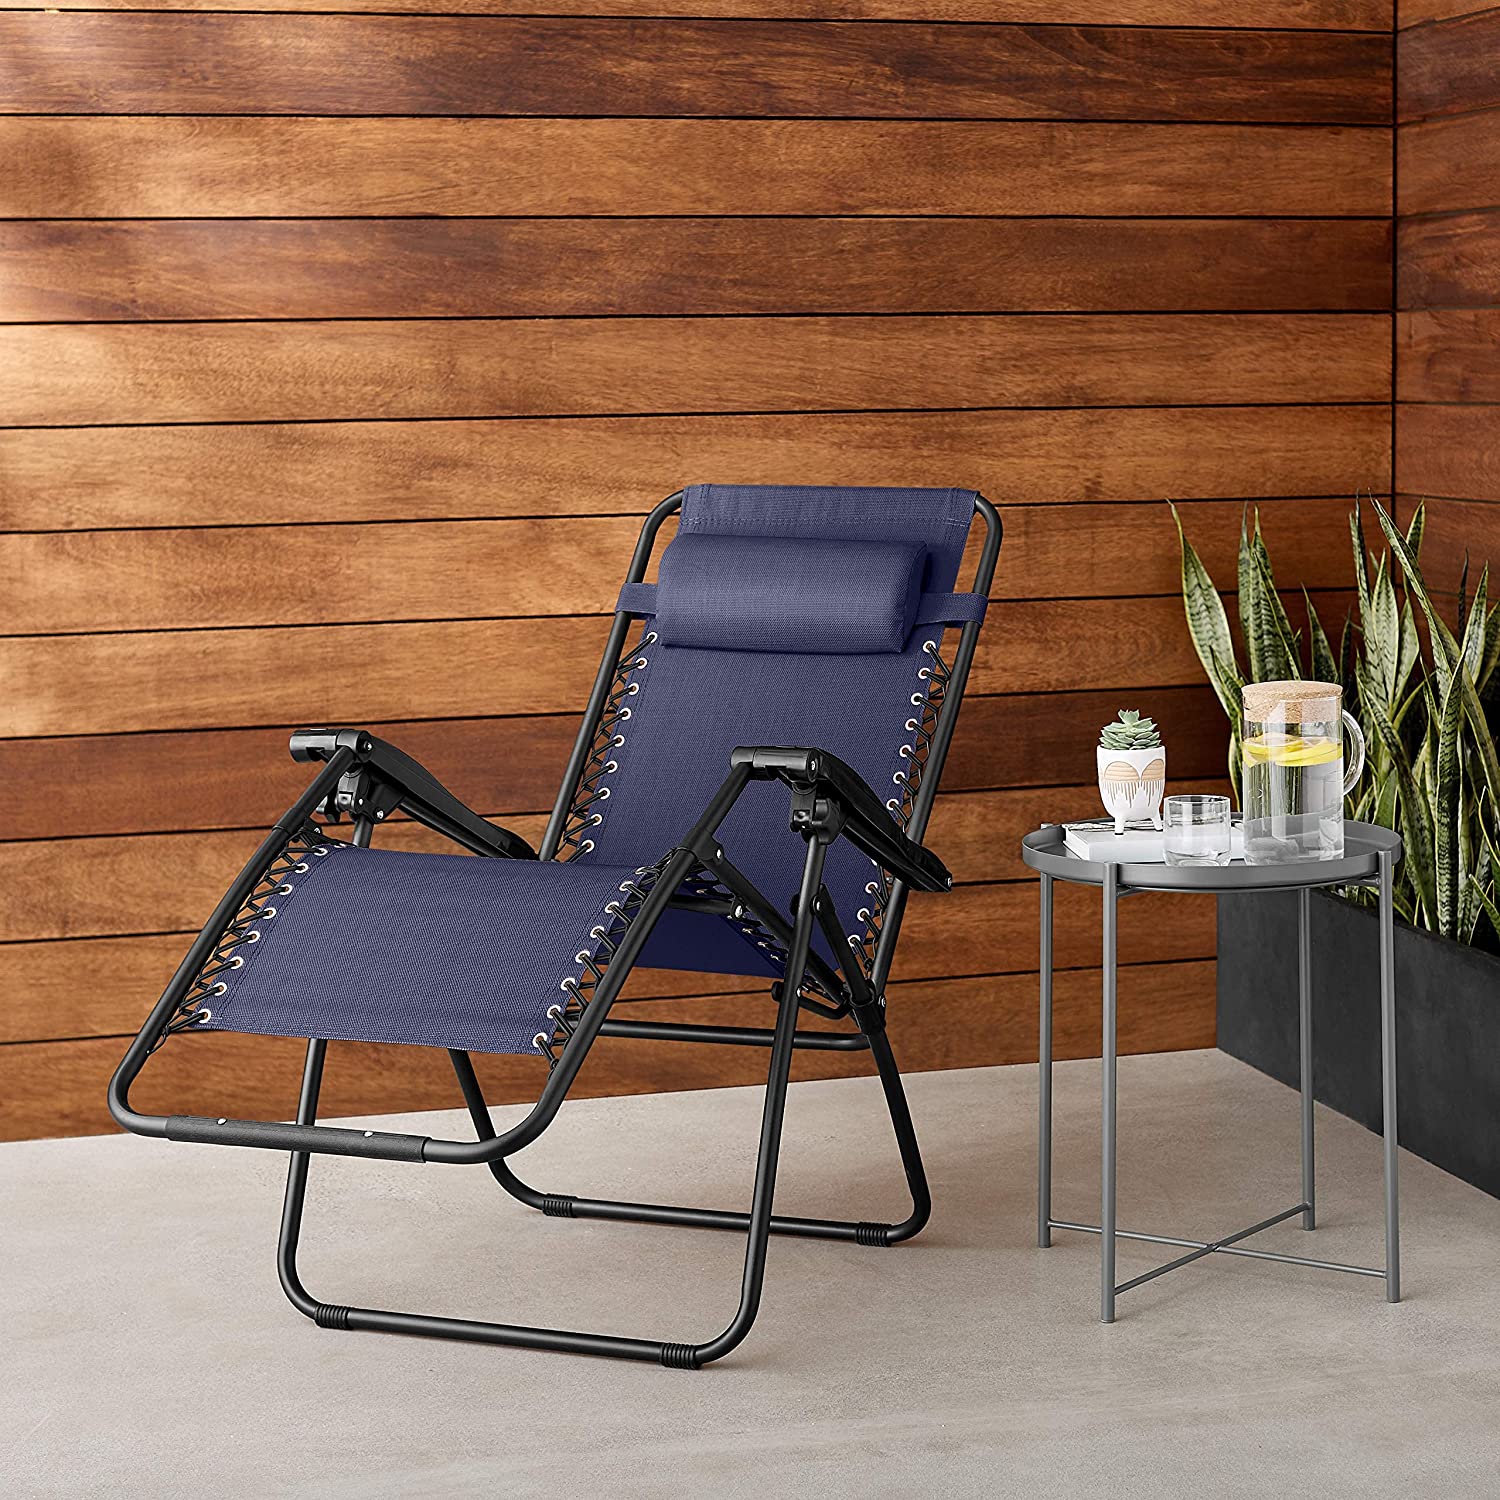 Amazon Basics Weightless Breathable Outdoor Lounge Chair